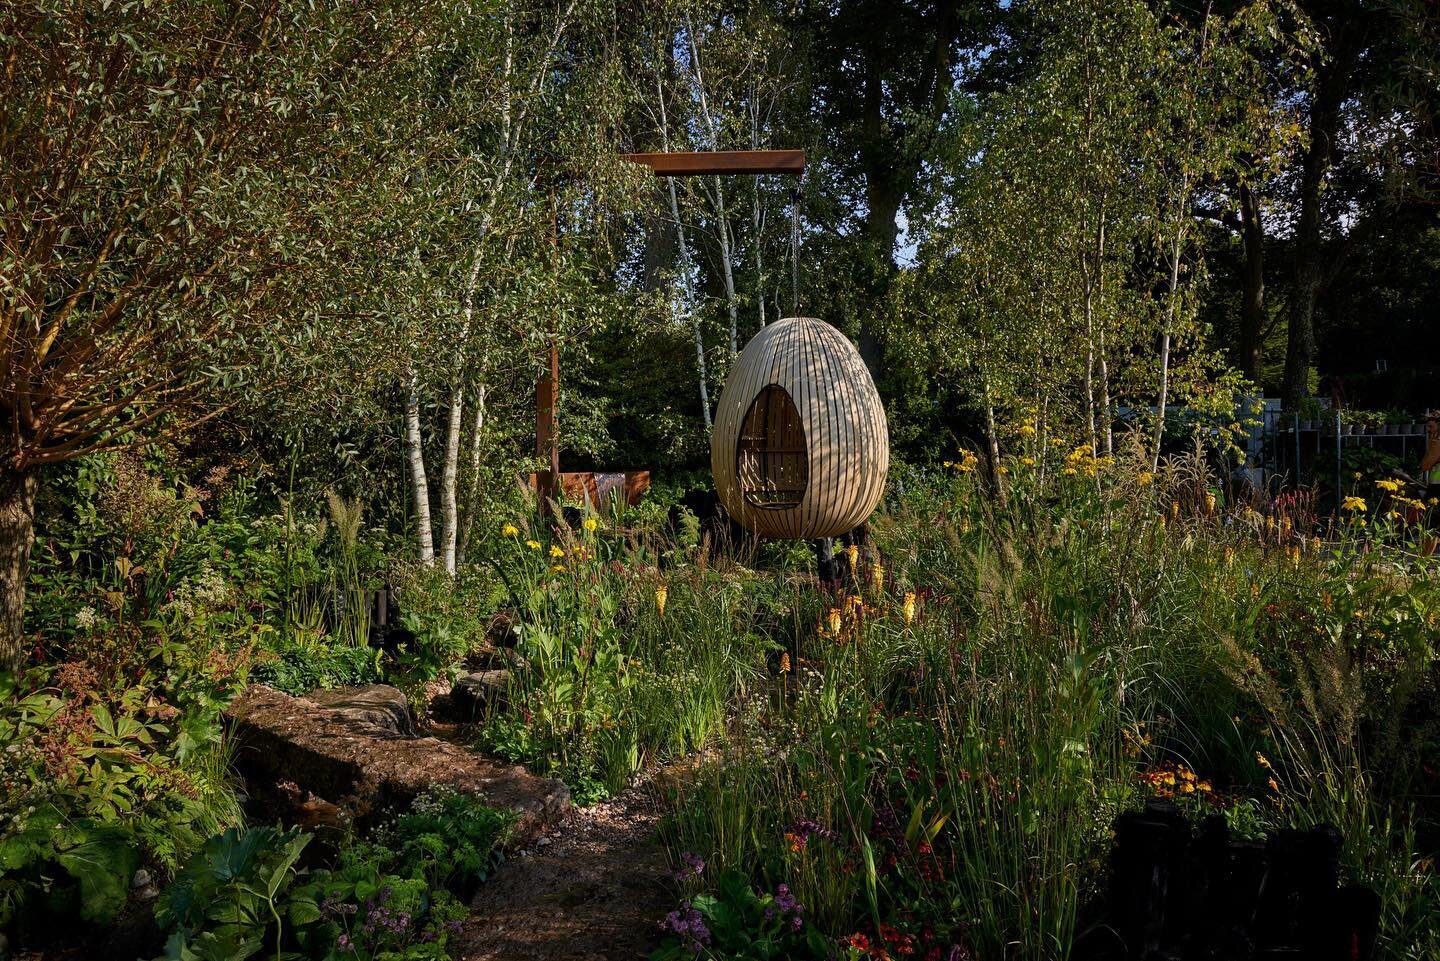 @the_rhs Show Garden Number 4:

🐄The Yeo Valley Organic Garden 
🌿RHS Chelsea Flower Show 2021
🏅Gold Medal &amp; BBC Peoples&rsquo; Choice

Sponsored by Yeo Valley Organic, this Main Avenue Show Garden was designed for the first and only autumn RHS